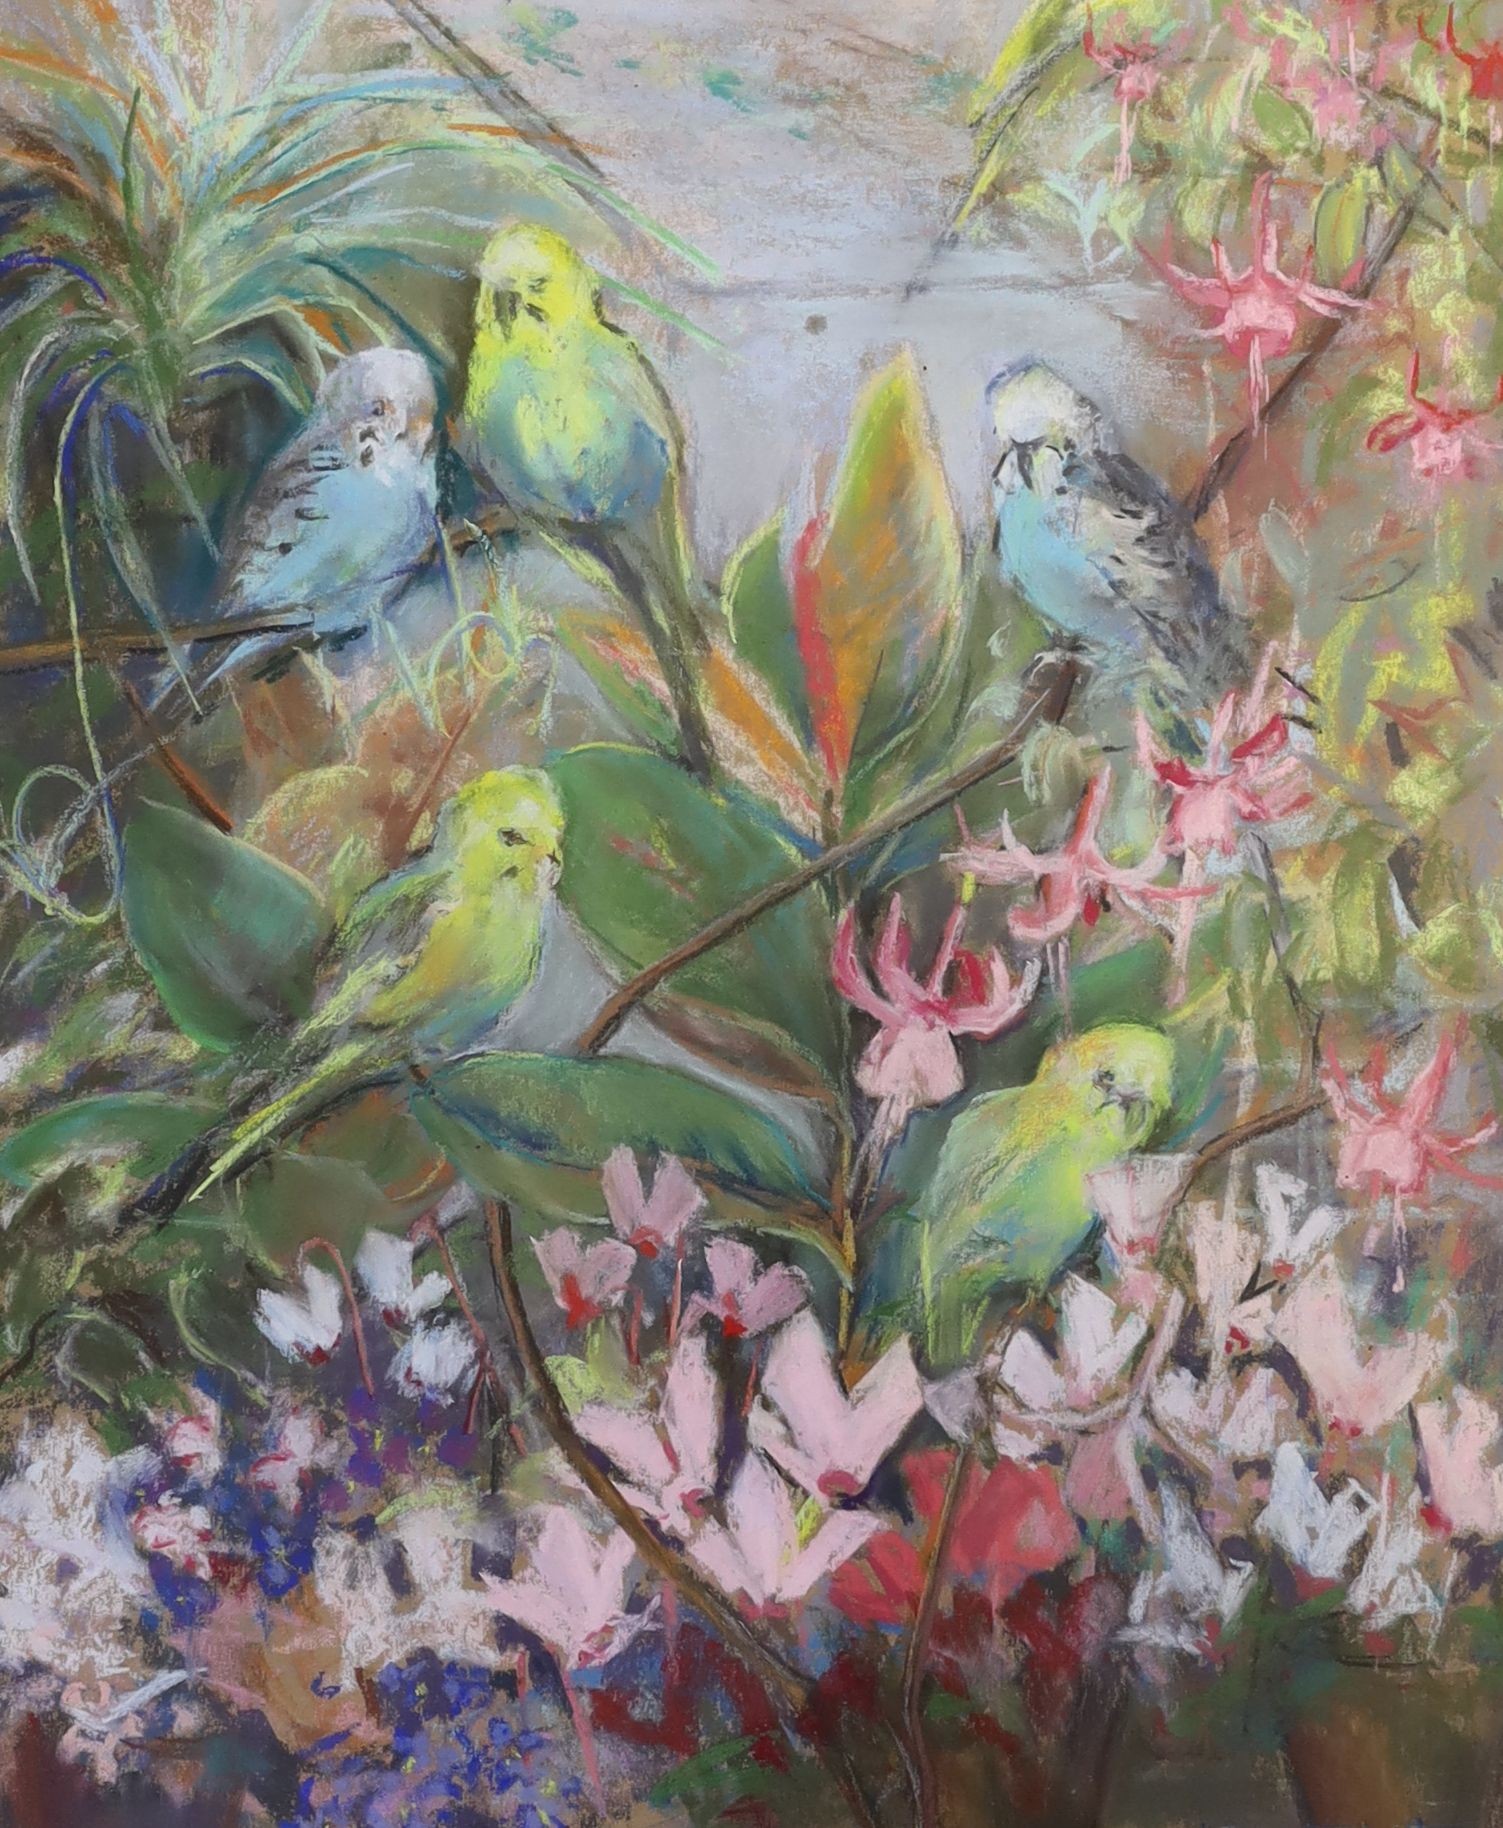 Hermione Thornton Lofthouse, pastel, 'Feathers amongst flowers', signed and dated '94, 55 x 44cm